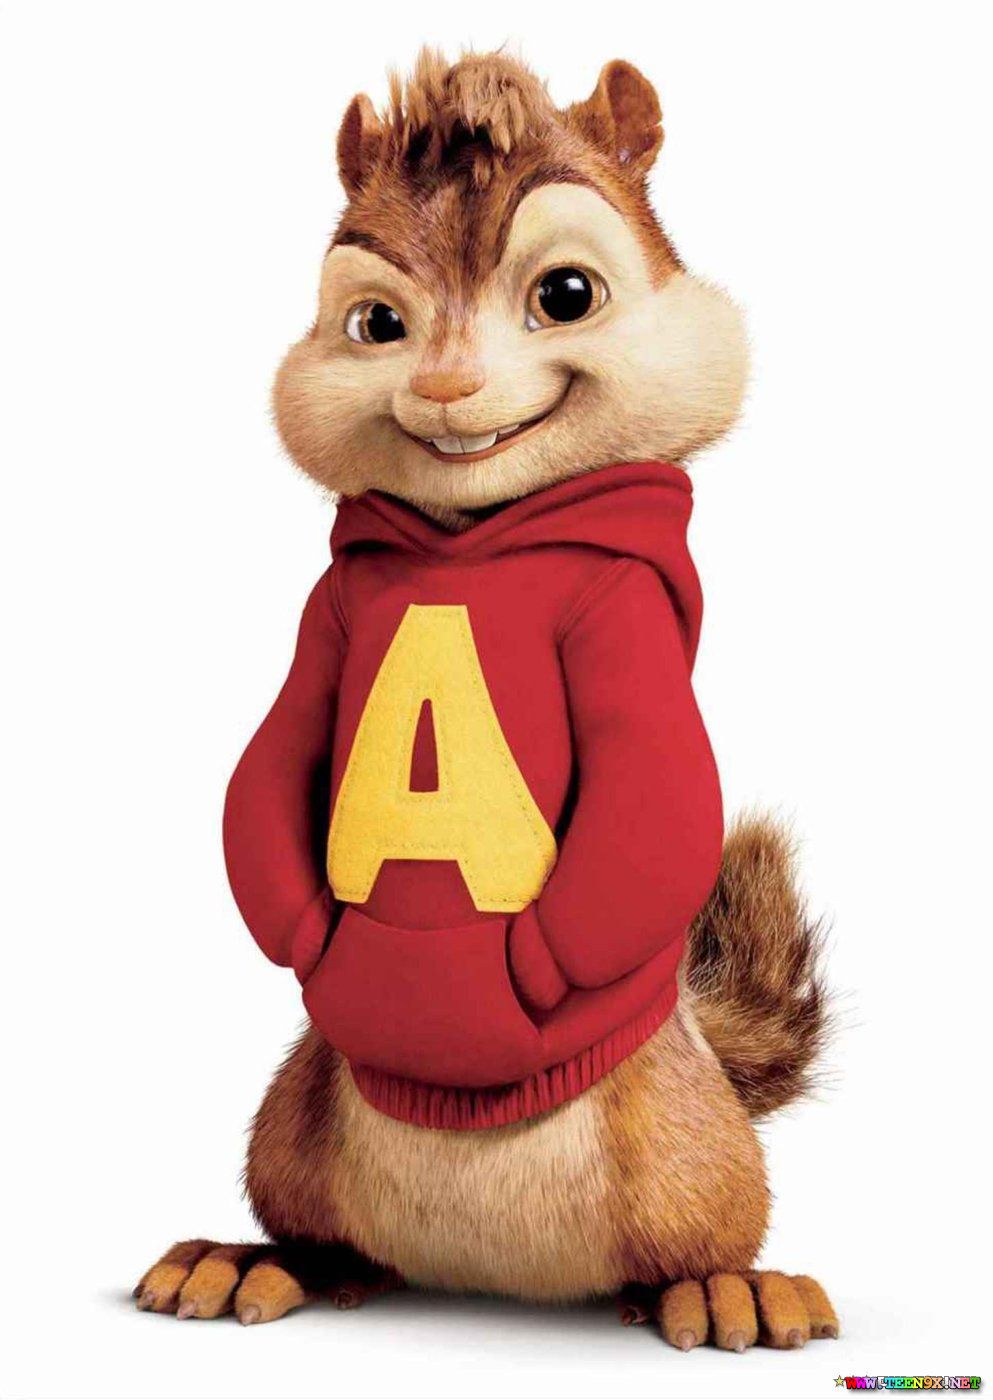 https://static.wikia.nocookie.net/alvinfanon/images/8/82/Alvin-alvin-and-the-chipmunks-3-chip-wrecked-27096005-993-1400.jpg/revision/latest?cb=20210813203044